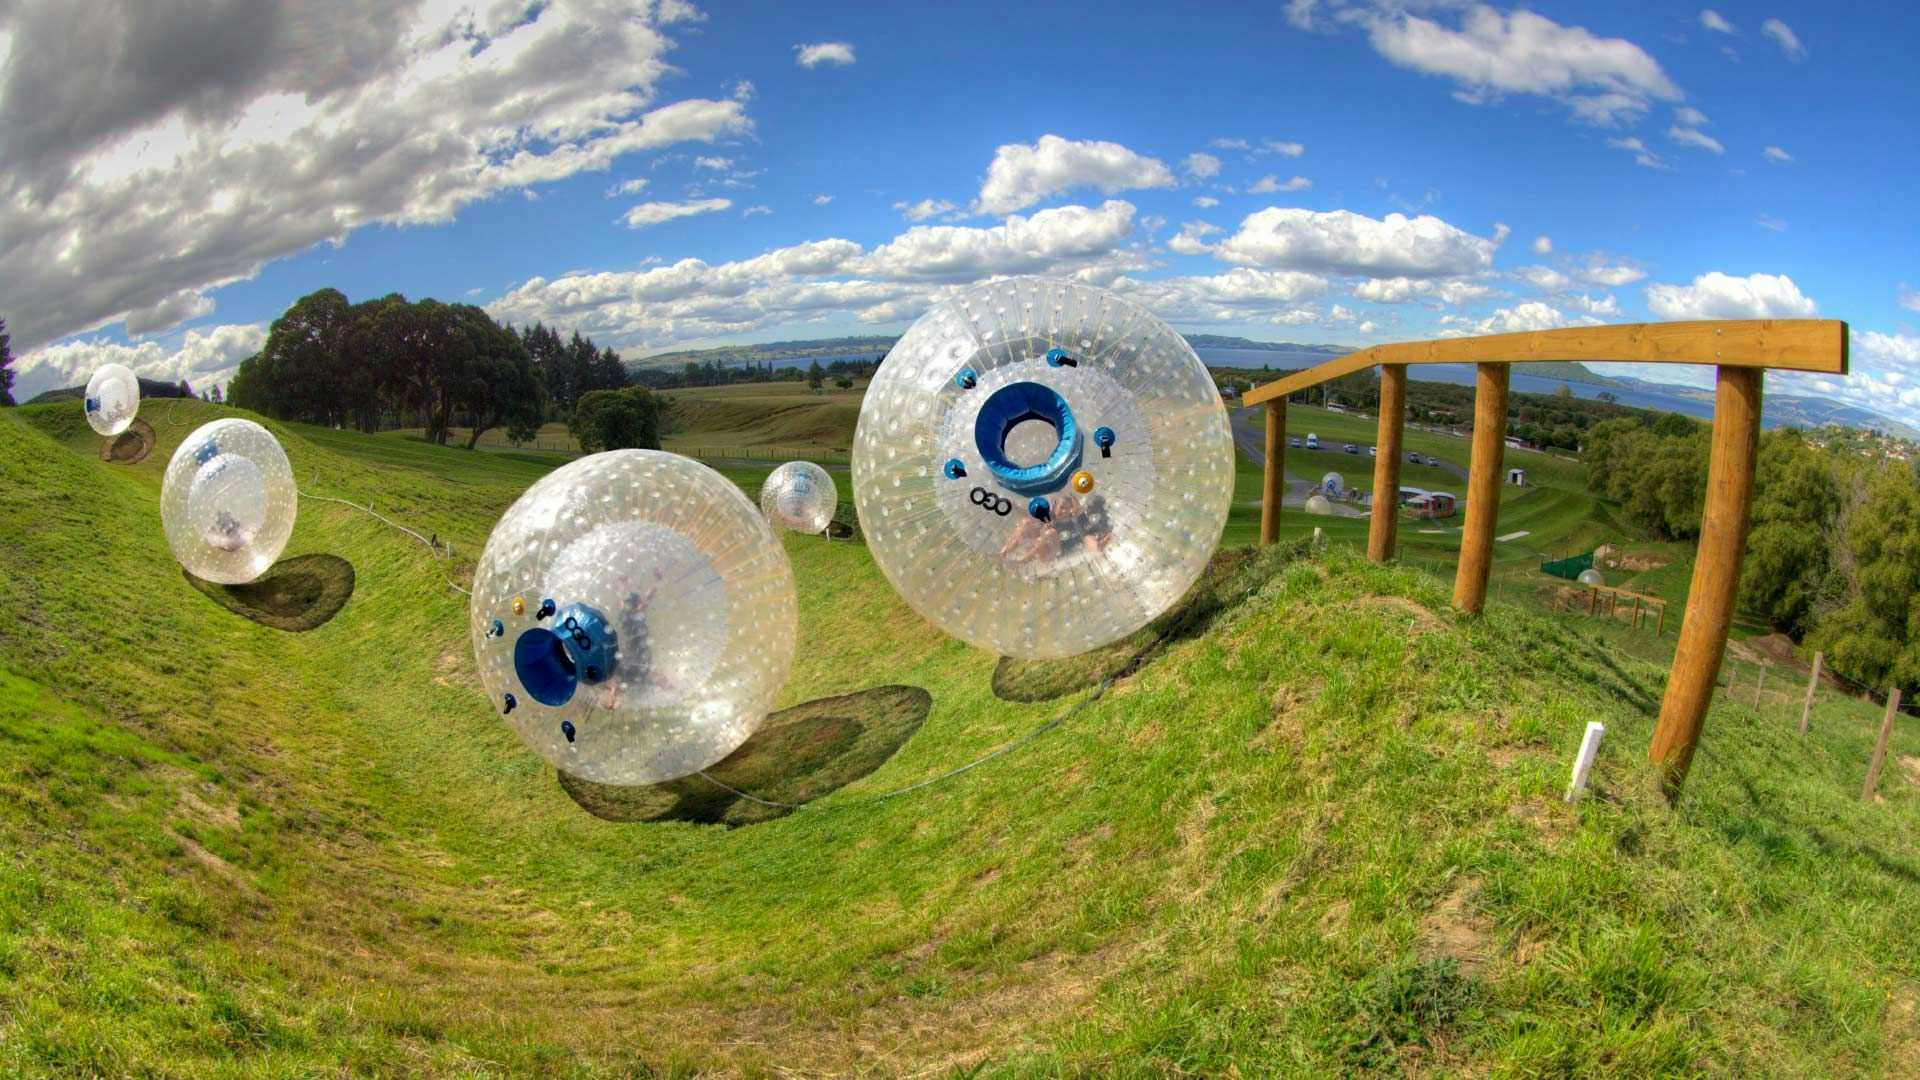 Zorbs rolling down a hill